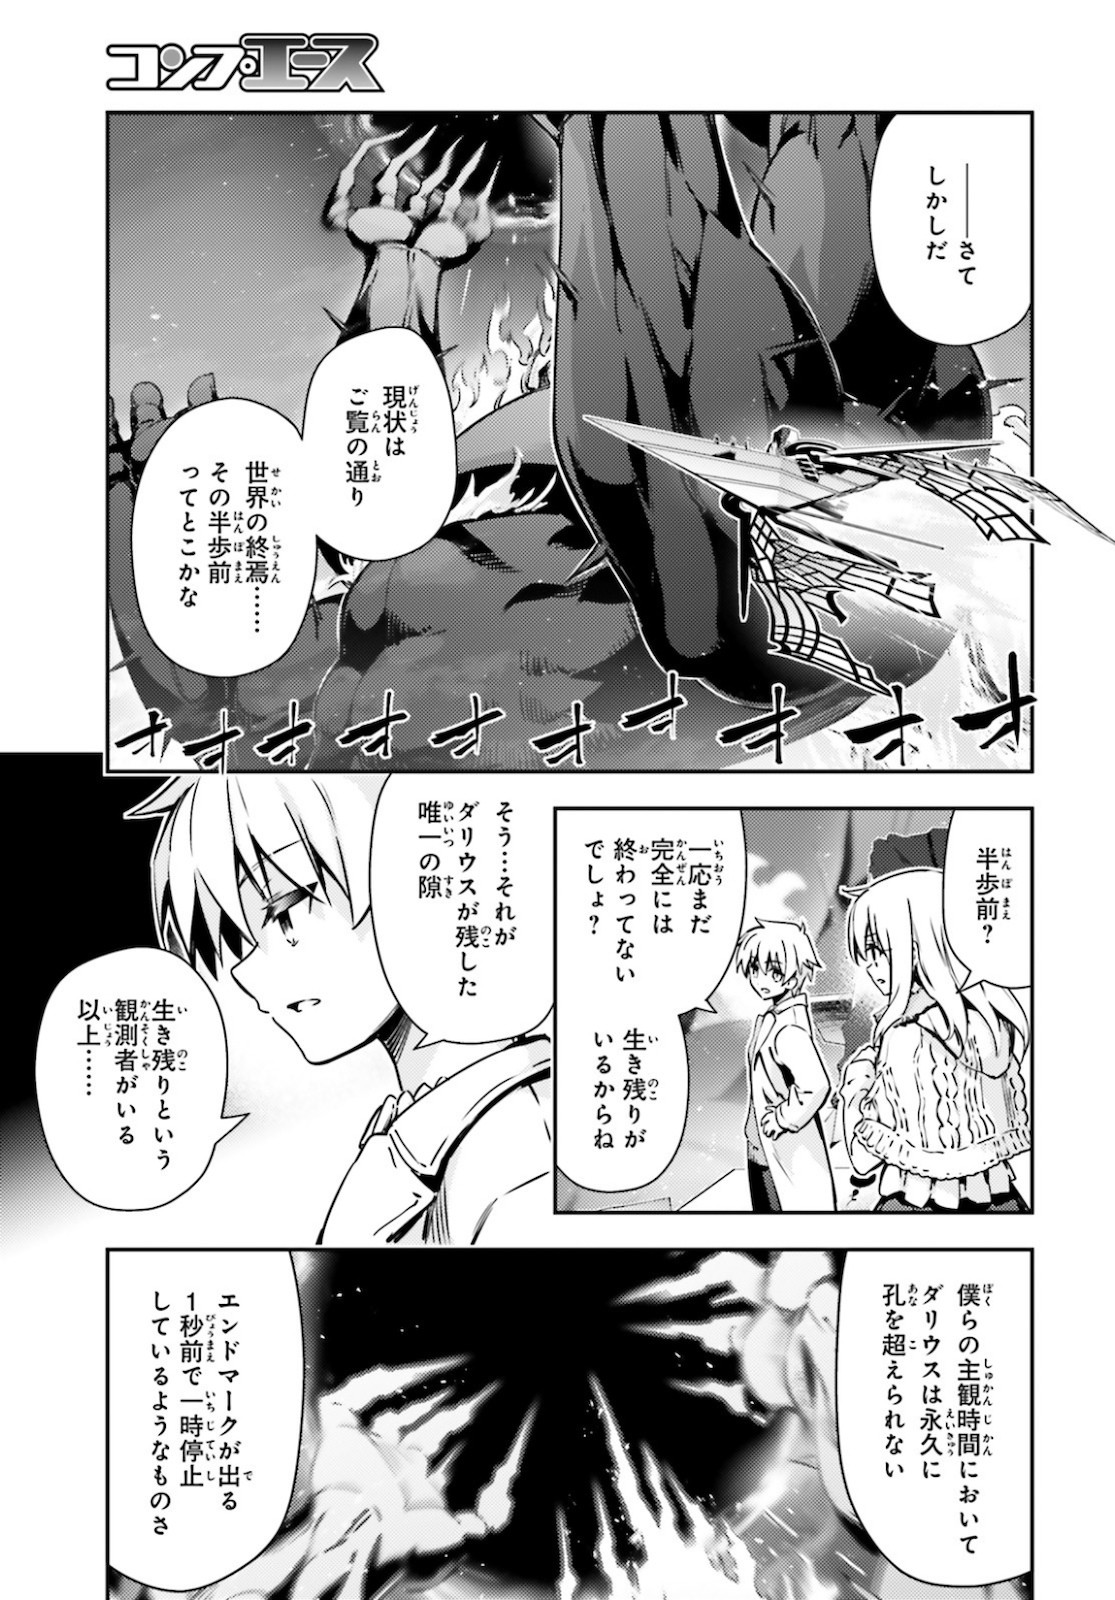 Fate/Kaleid Liner Prisma Illya Drei! - Chapter 62-2 - Page 4